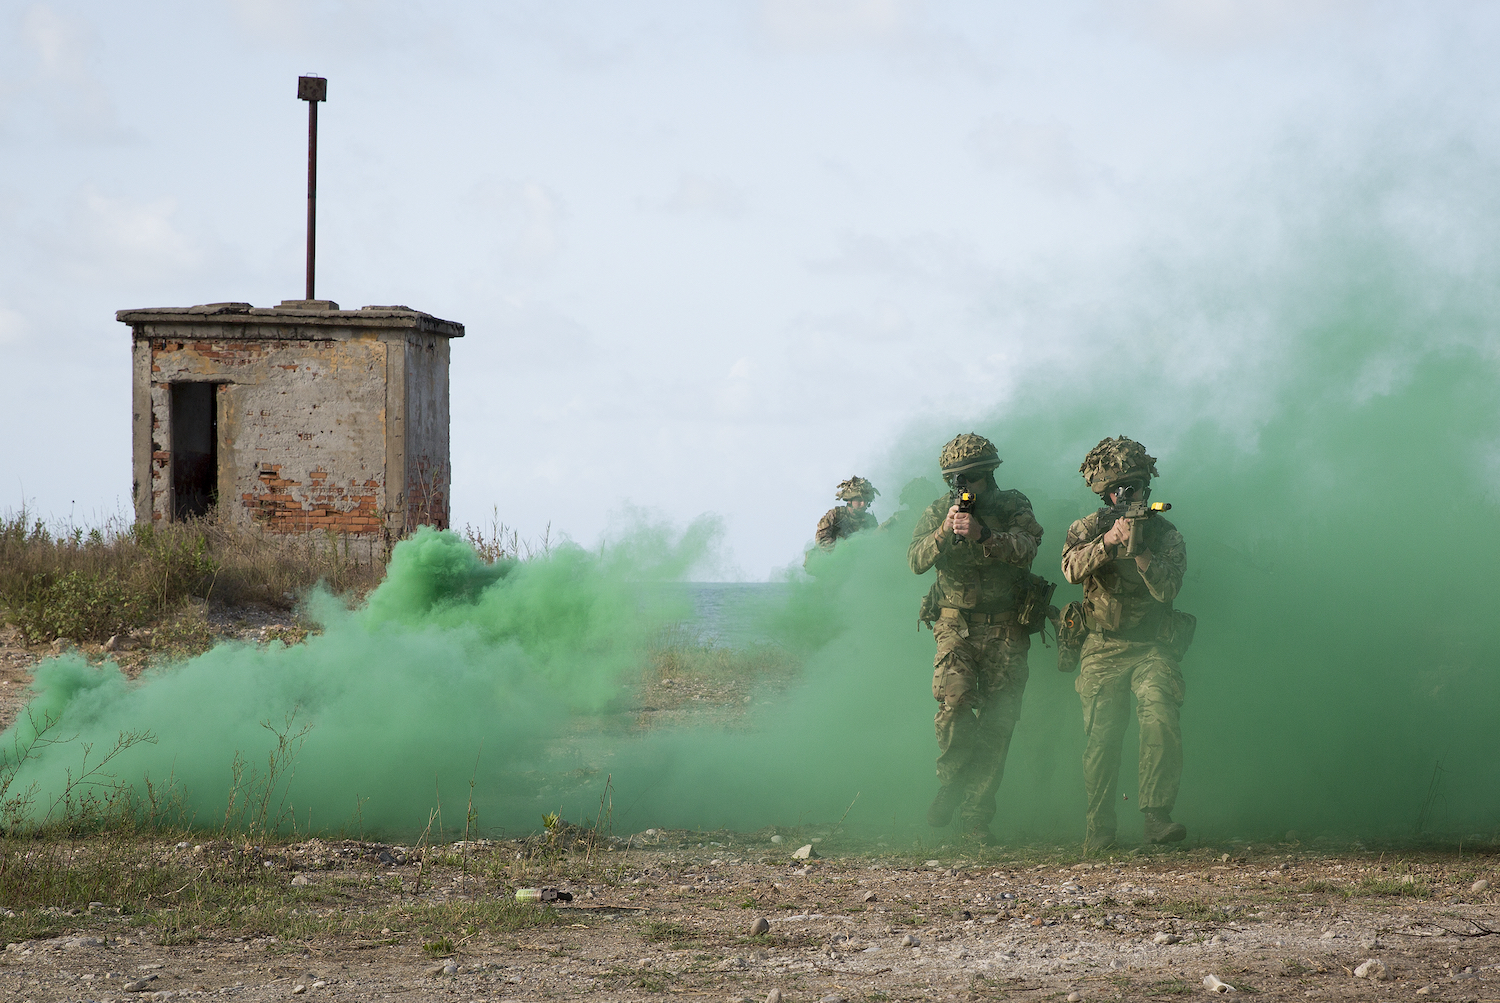 Personnel with a green smoke flare in the background